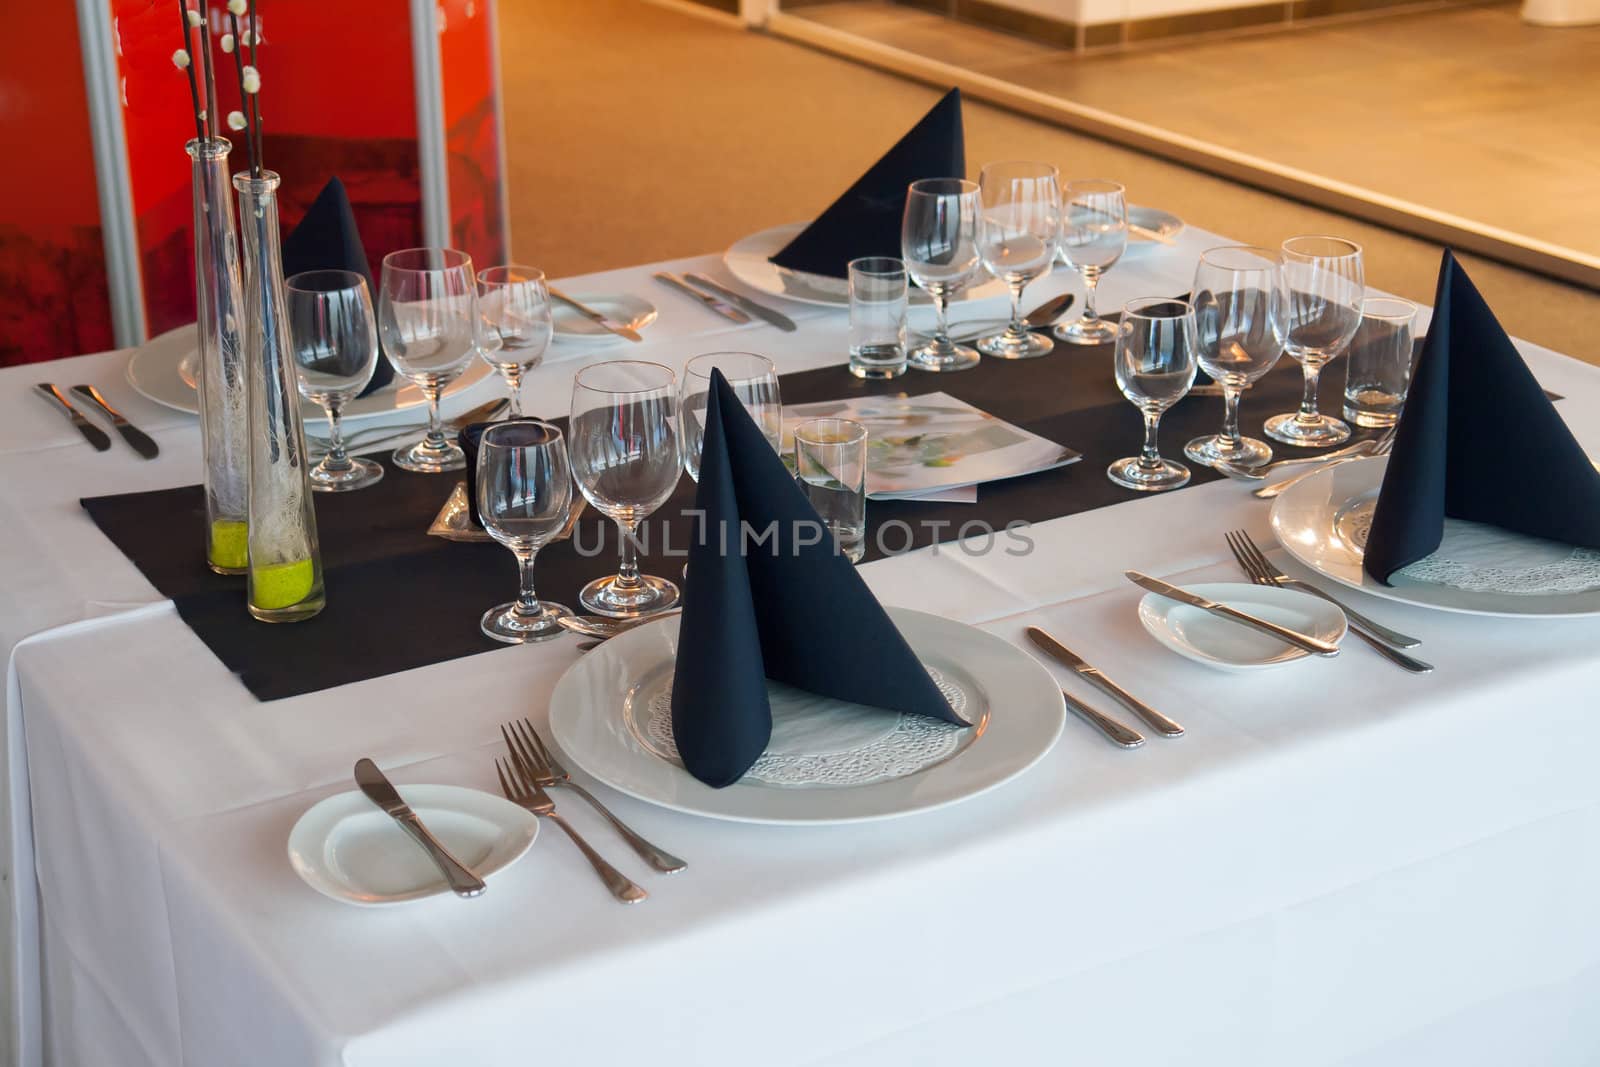 Fine restaurant beautiful dinner table place setting with classical decorative items